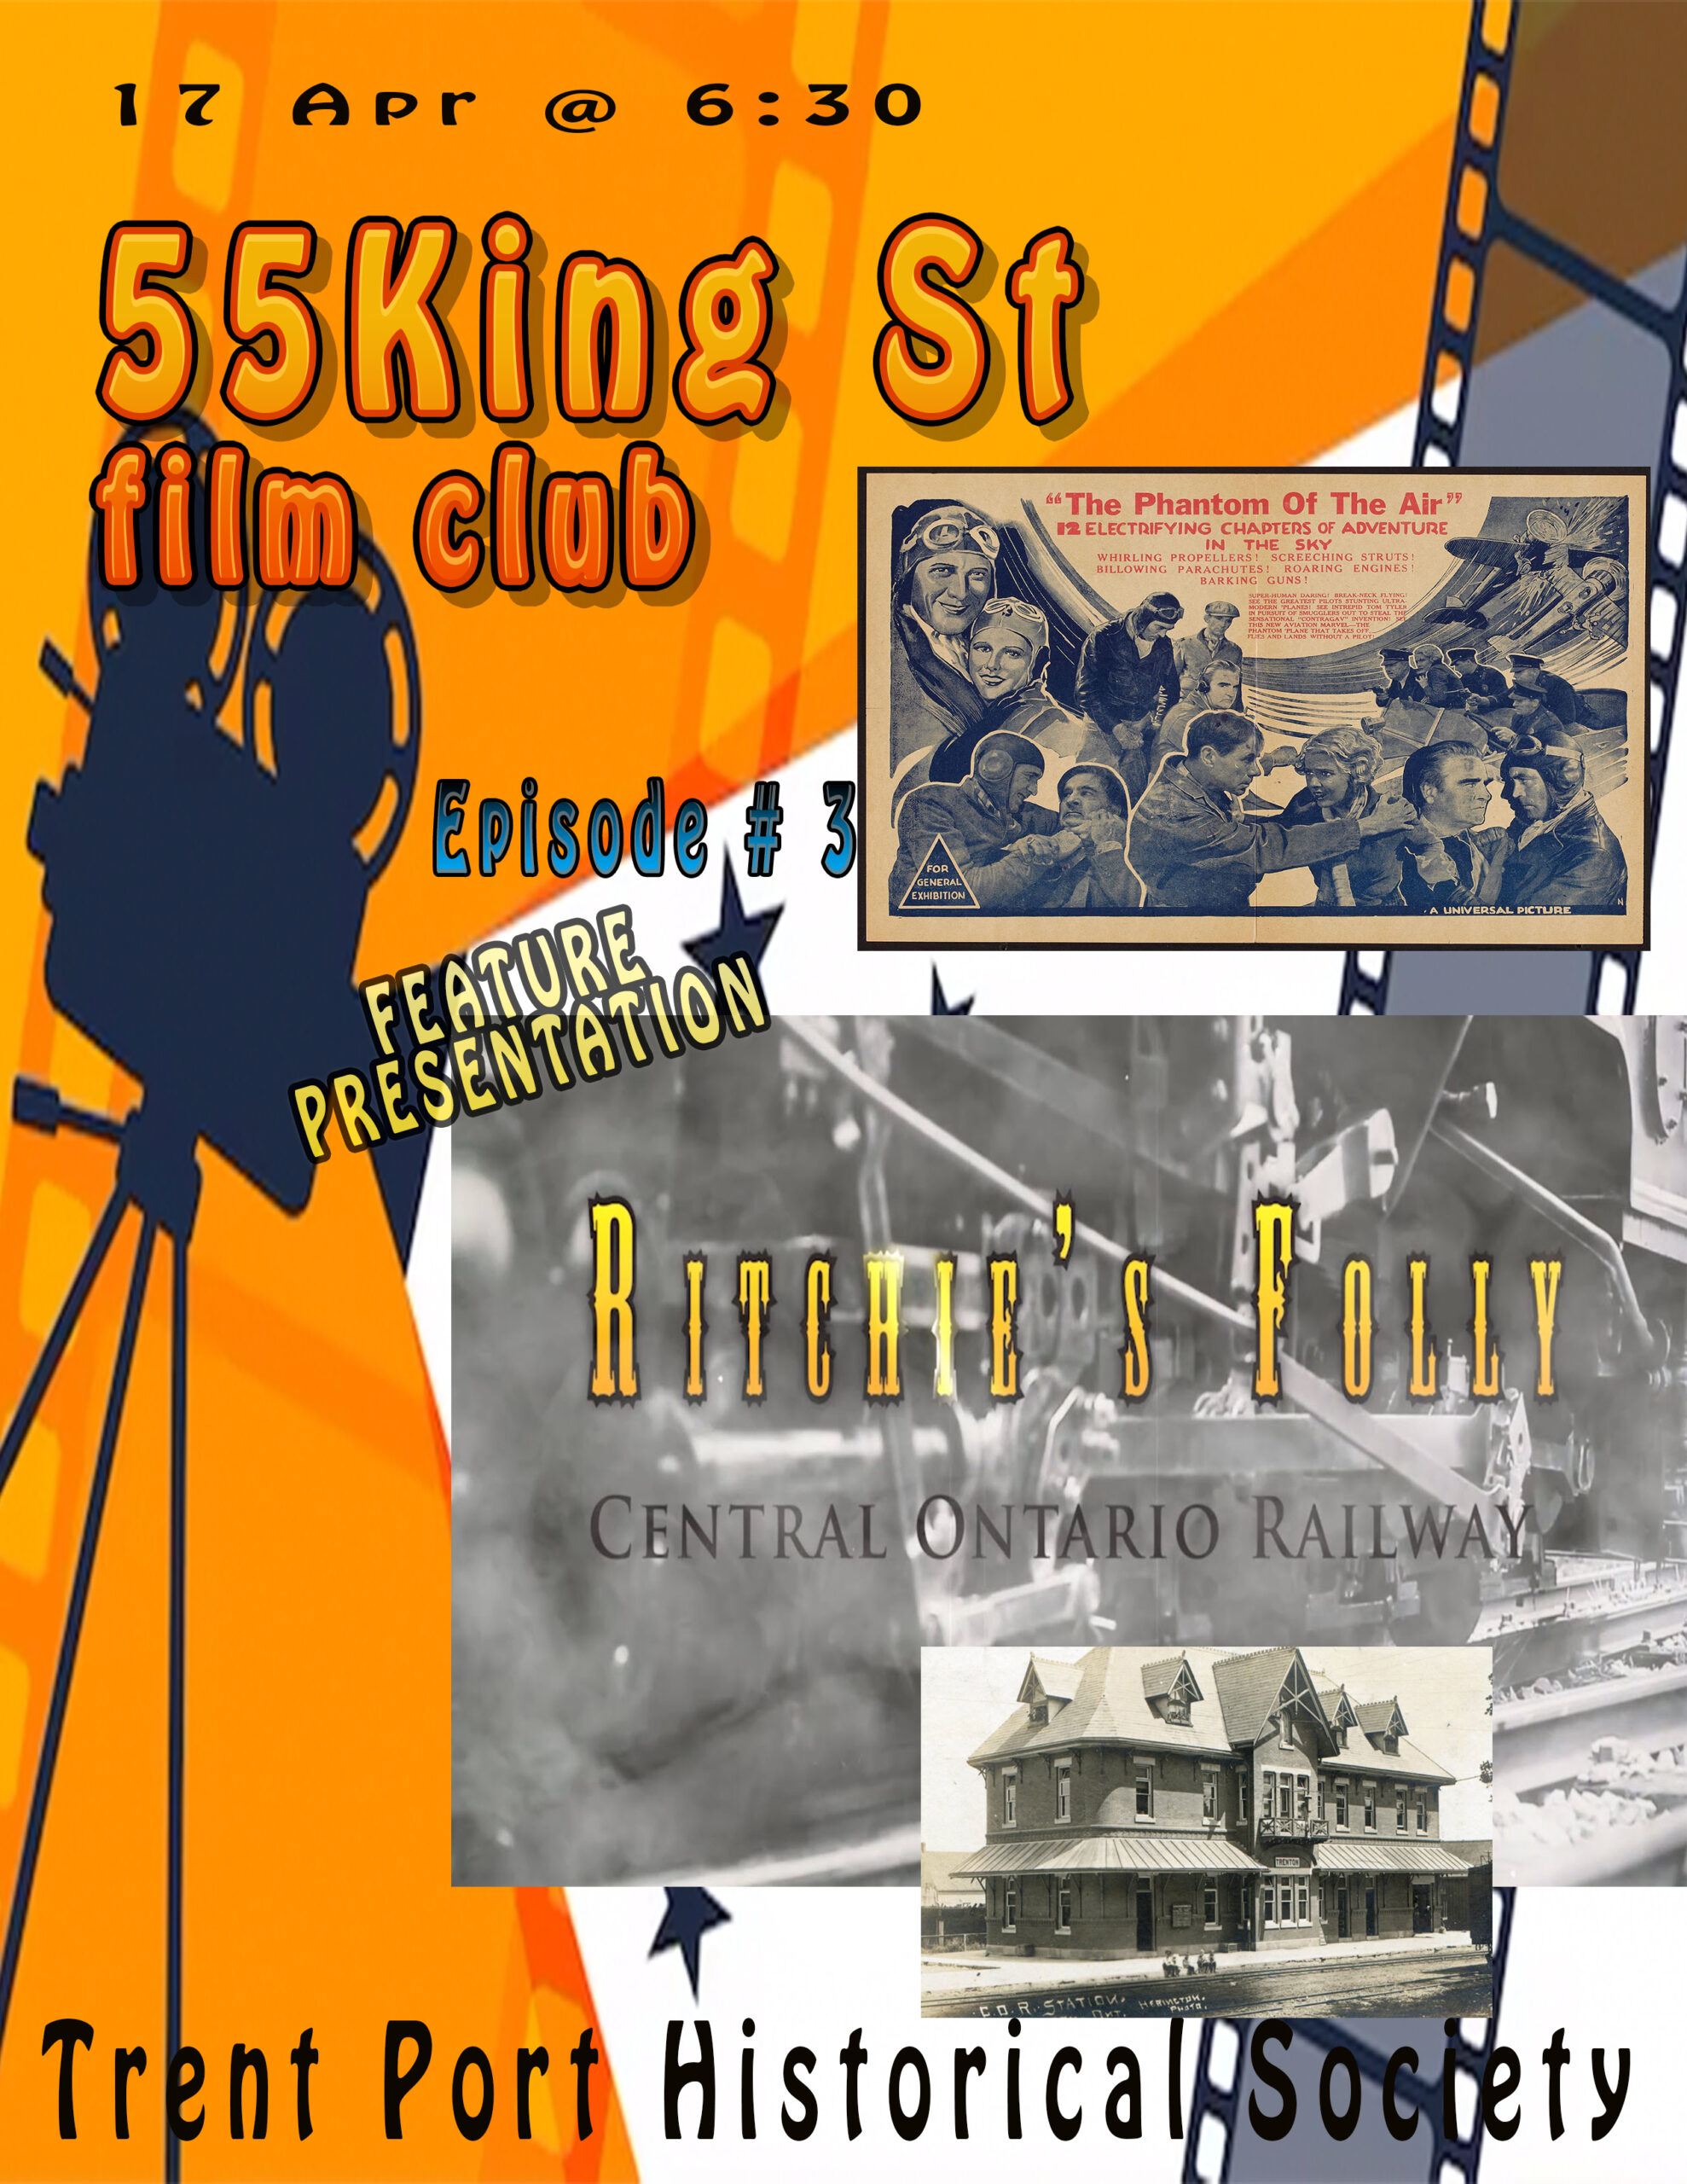 Event poster with stills from the film titled "55 King St Film Club"